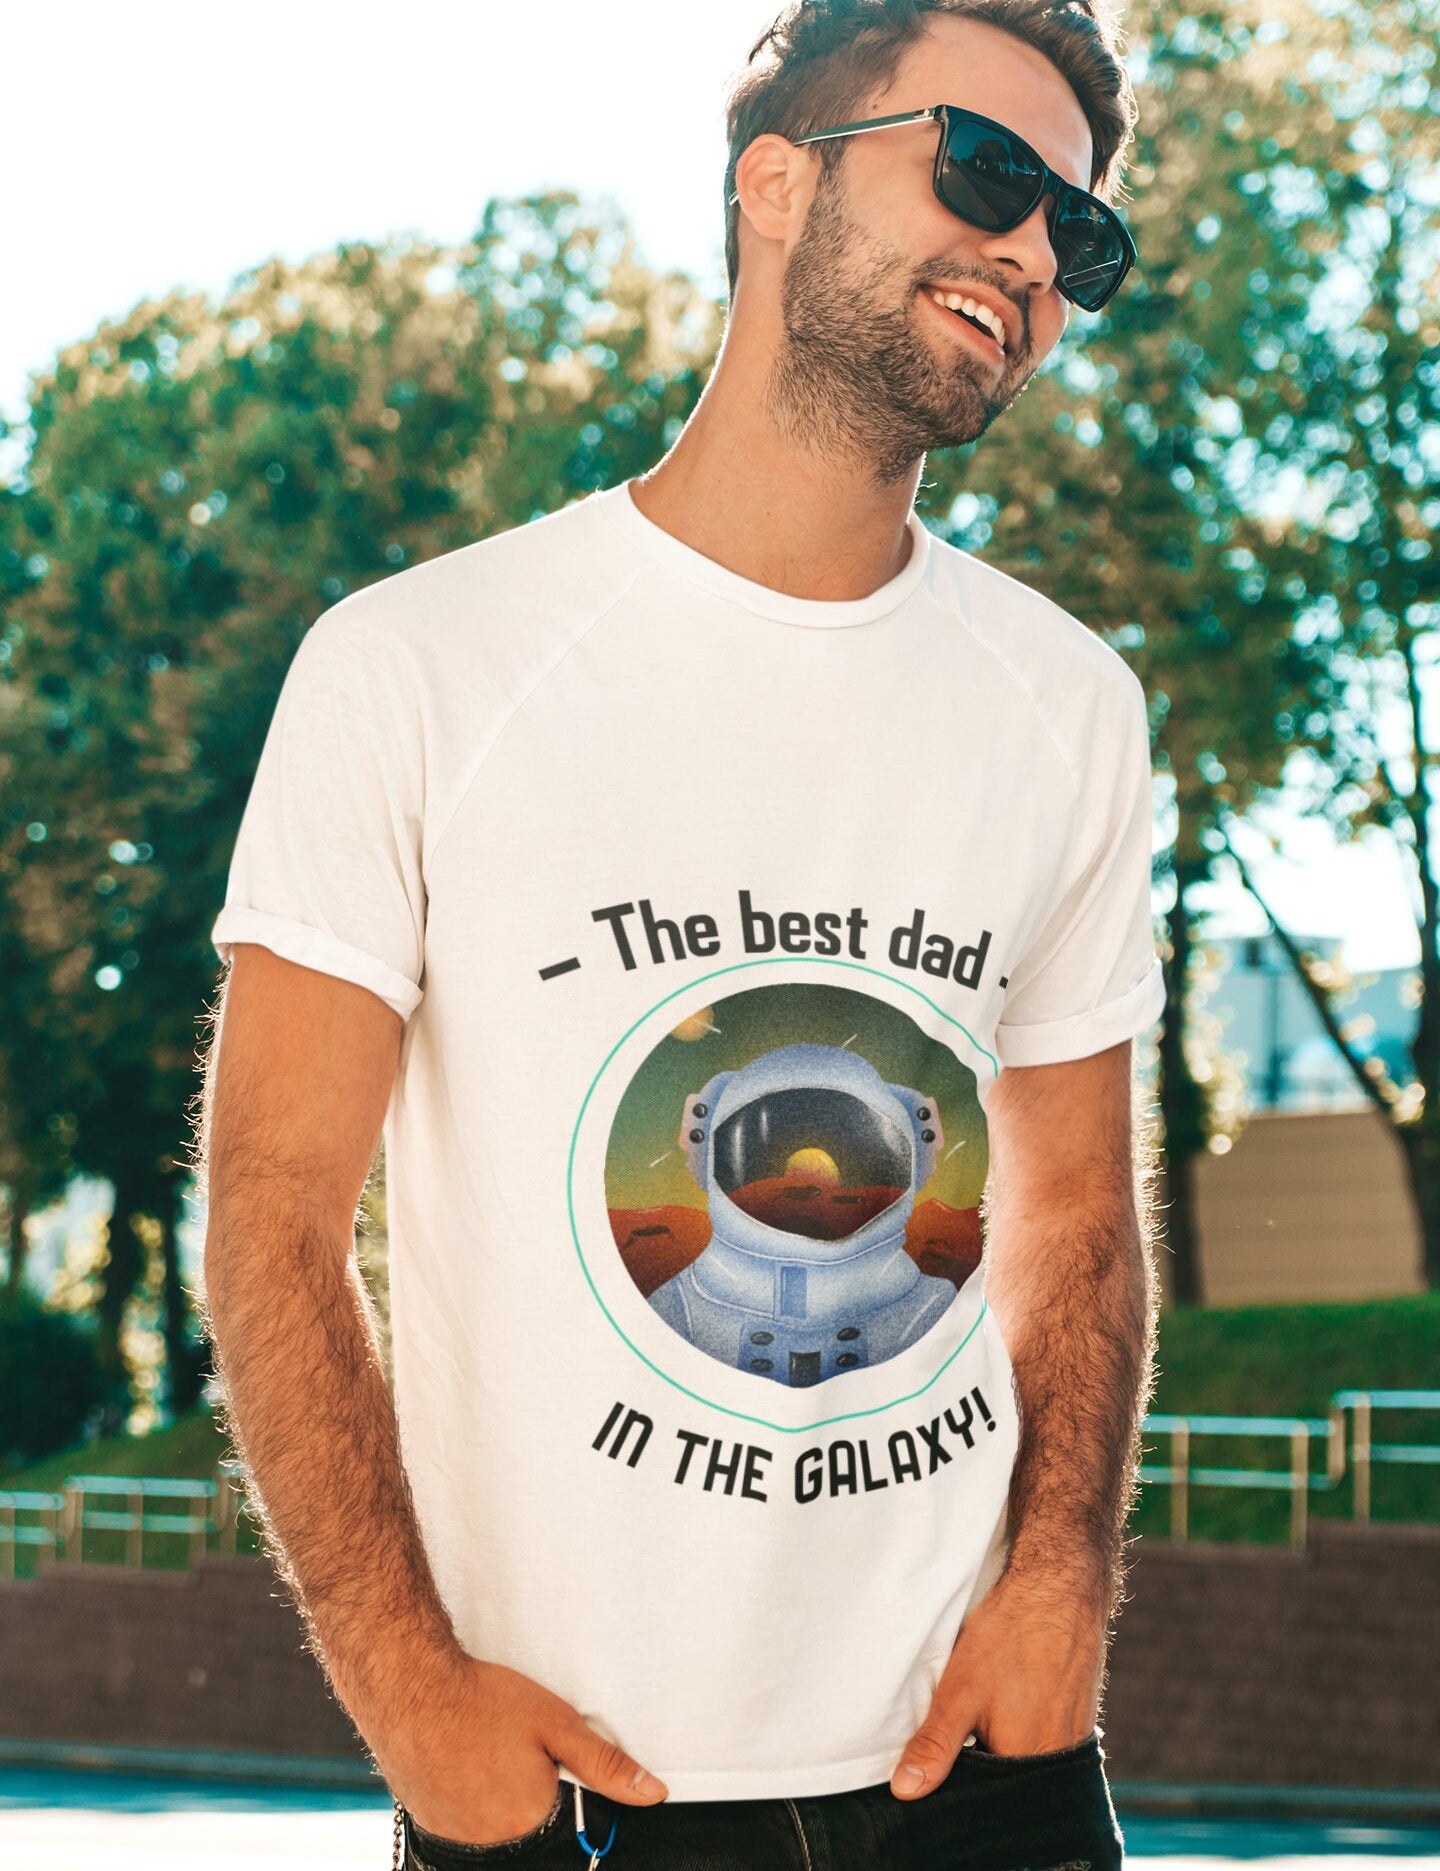 The Best Dad In The Galaxy T-Shirts, funny father day gift, funny Star Wars shirt, Darth Vader and Leia, Star Wars Family - plusminusco.com